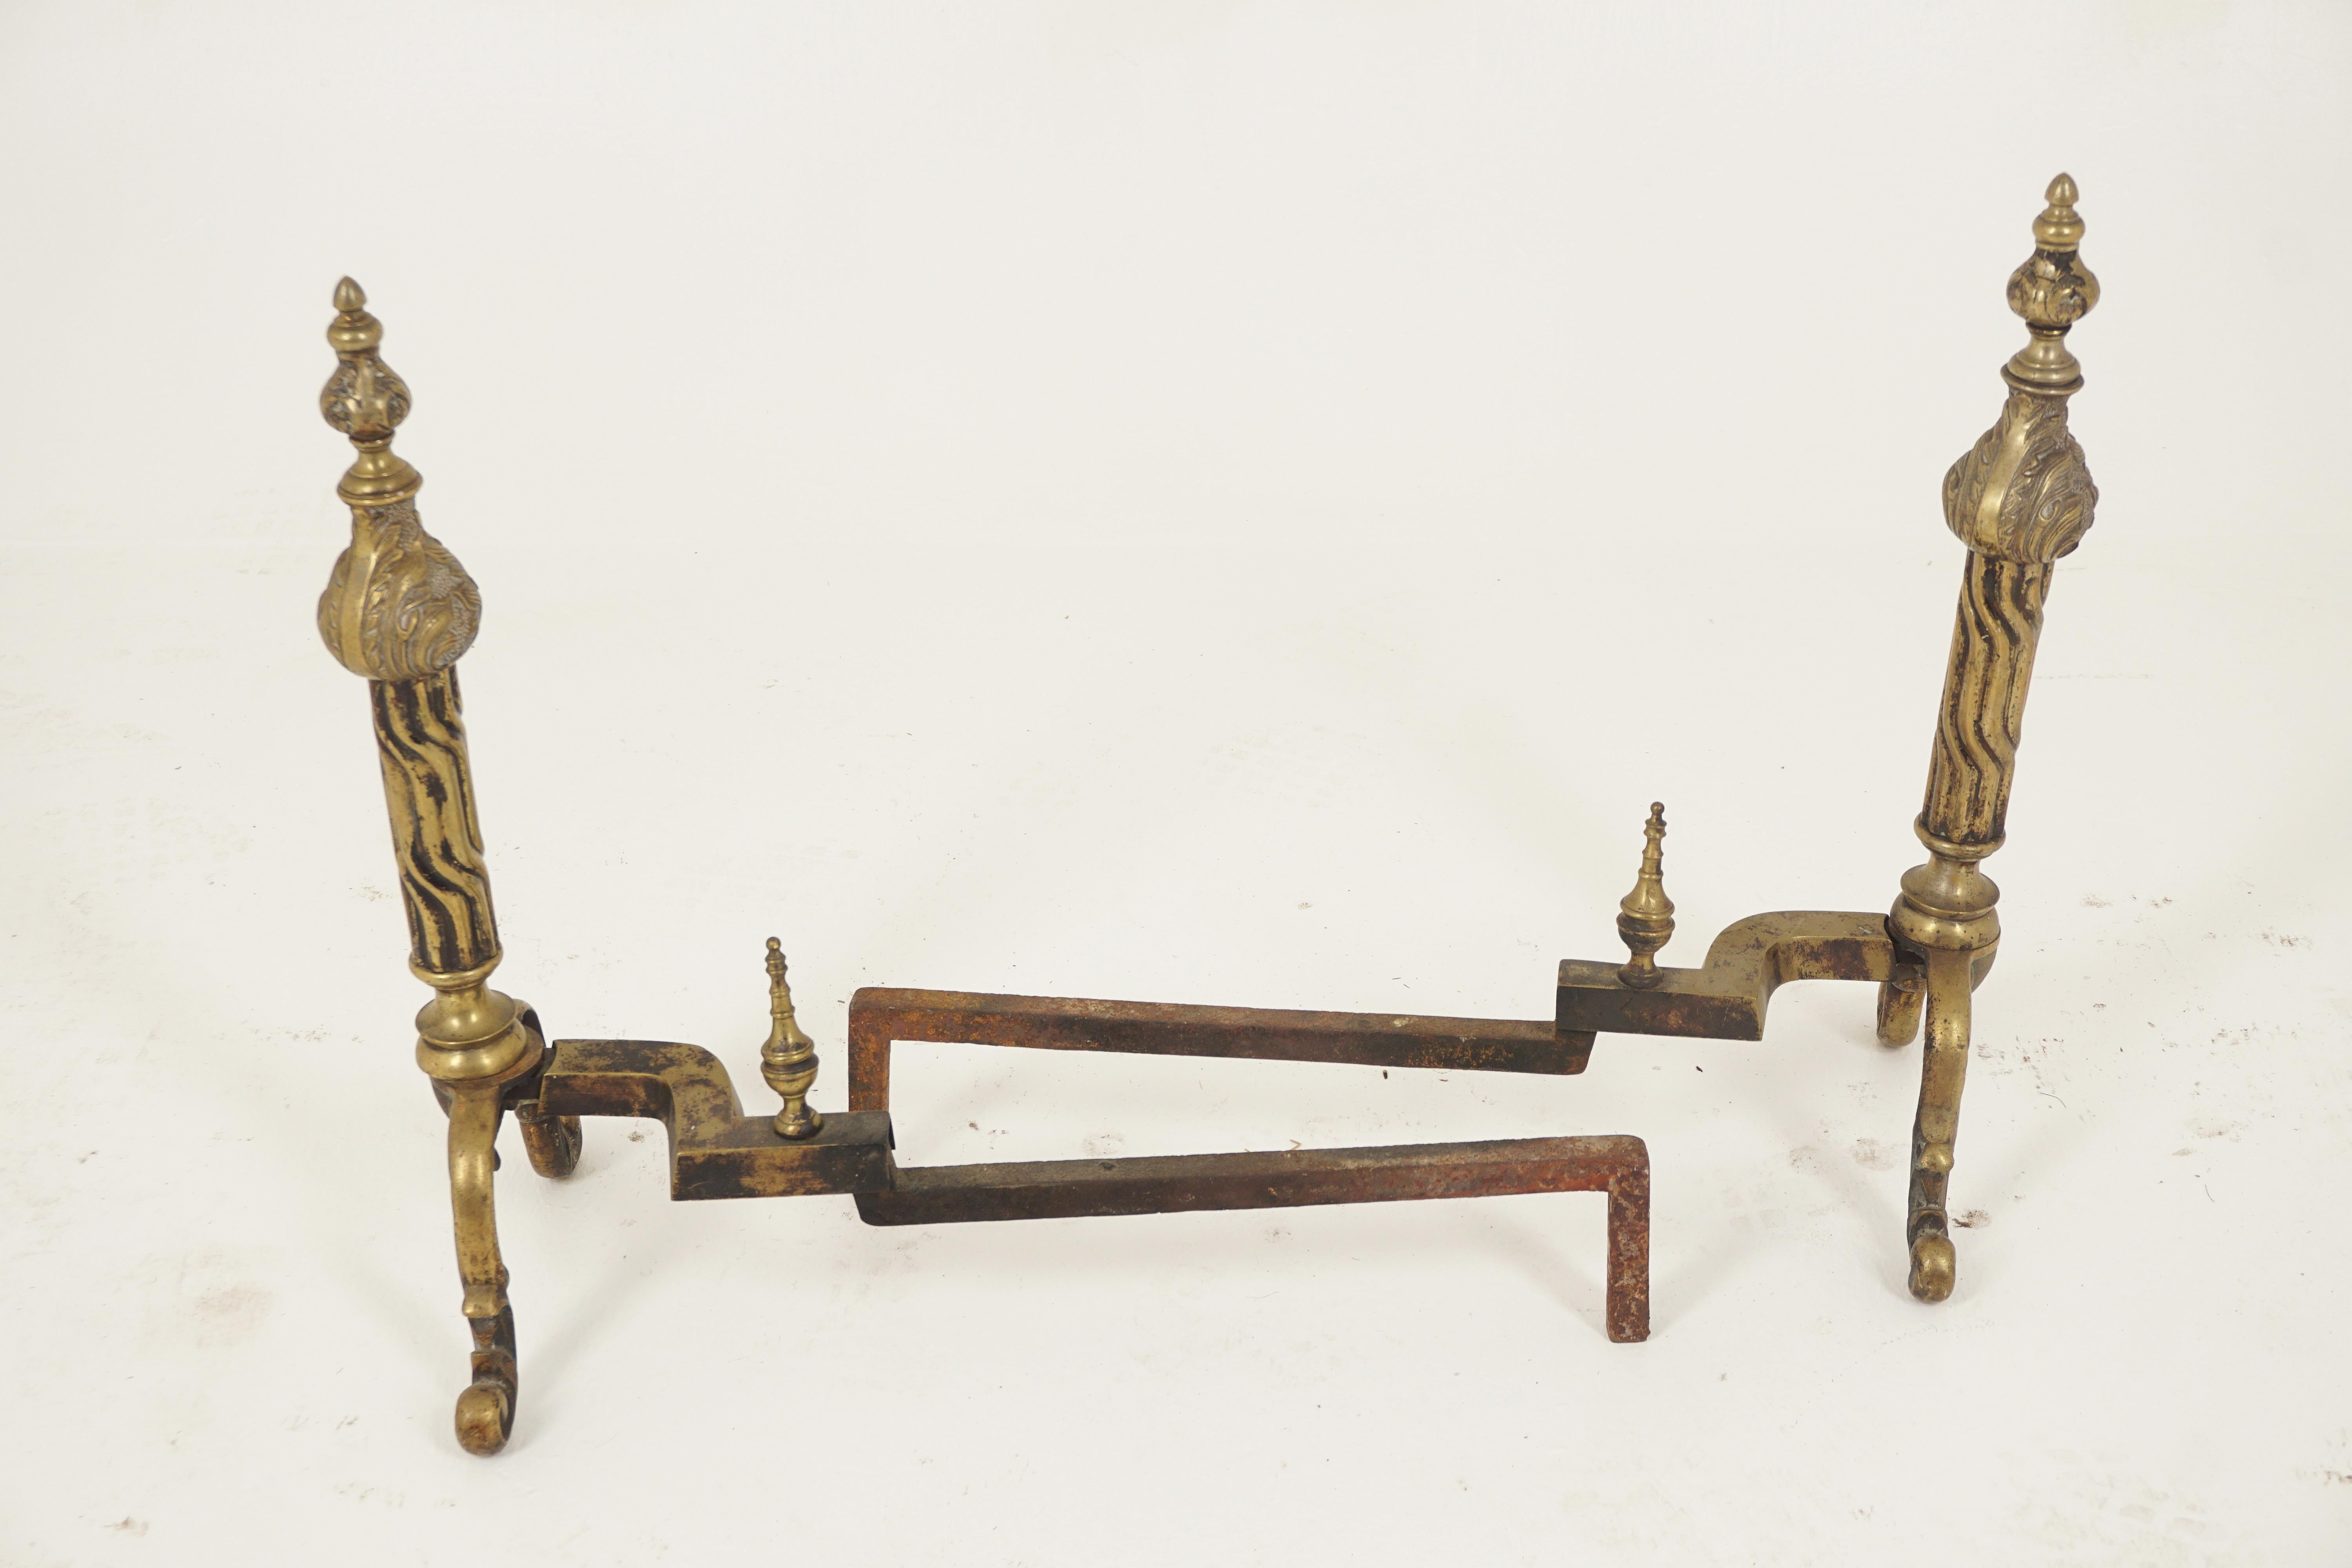 Antique brass fire dogs, pair of large Baroque style andirons, England 1870, H329

England 1870
Solid brass
With flame finials
With shaped column
Standing on foliate shaped cabriole legs
Nice size and in good condition

H329

Measures: 10